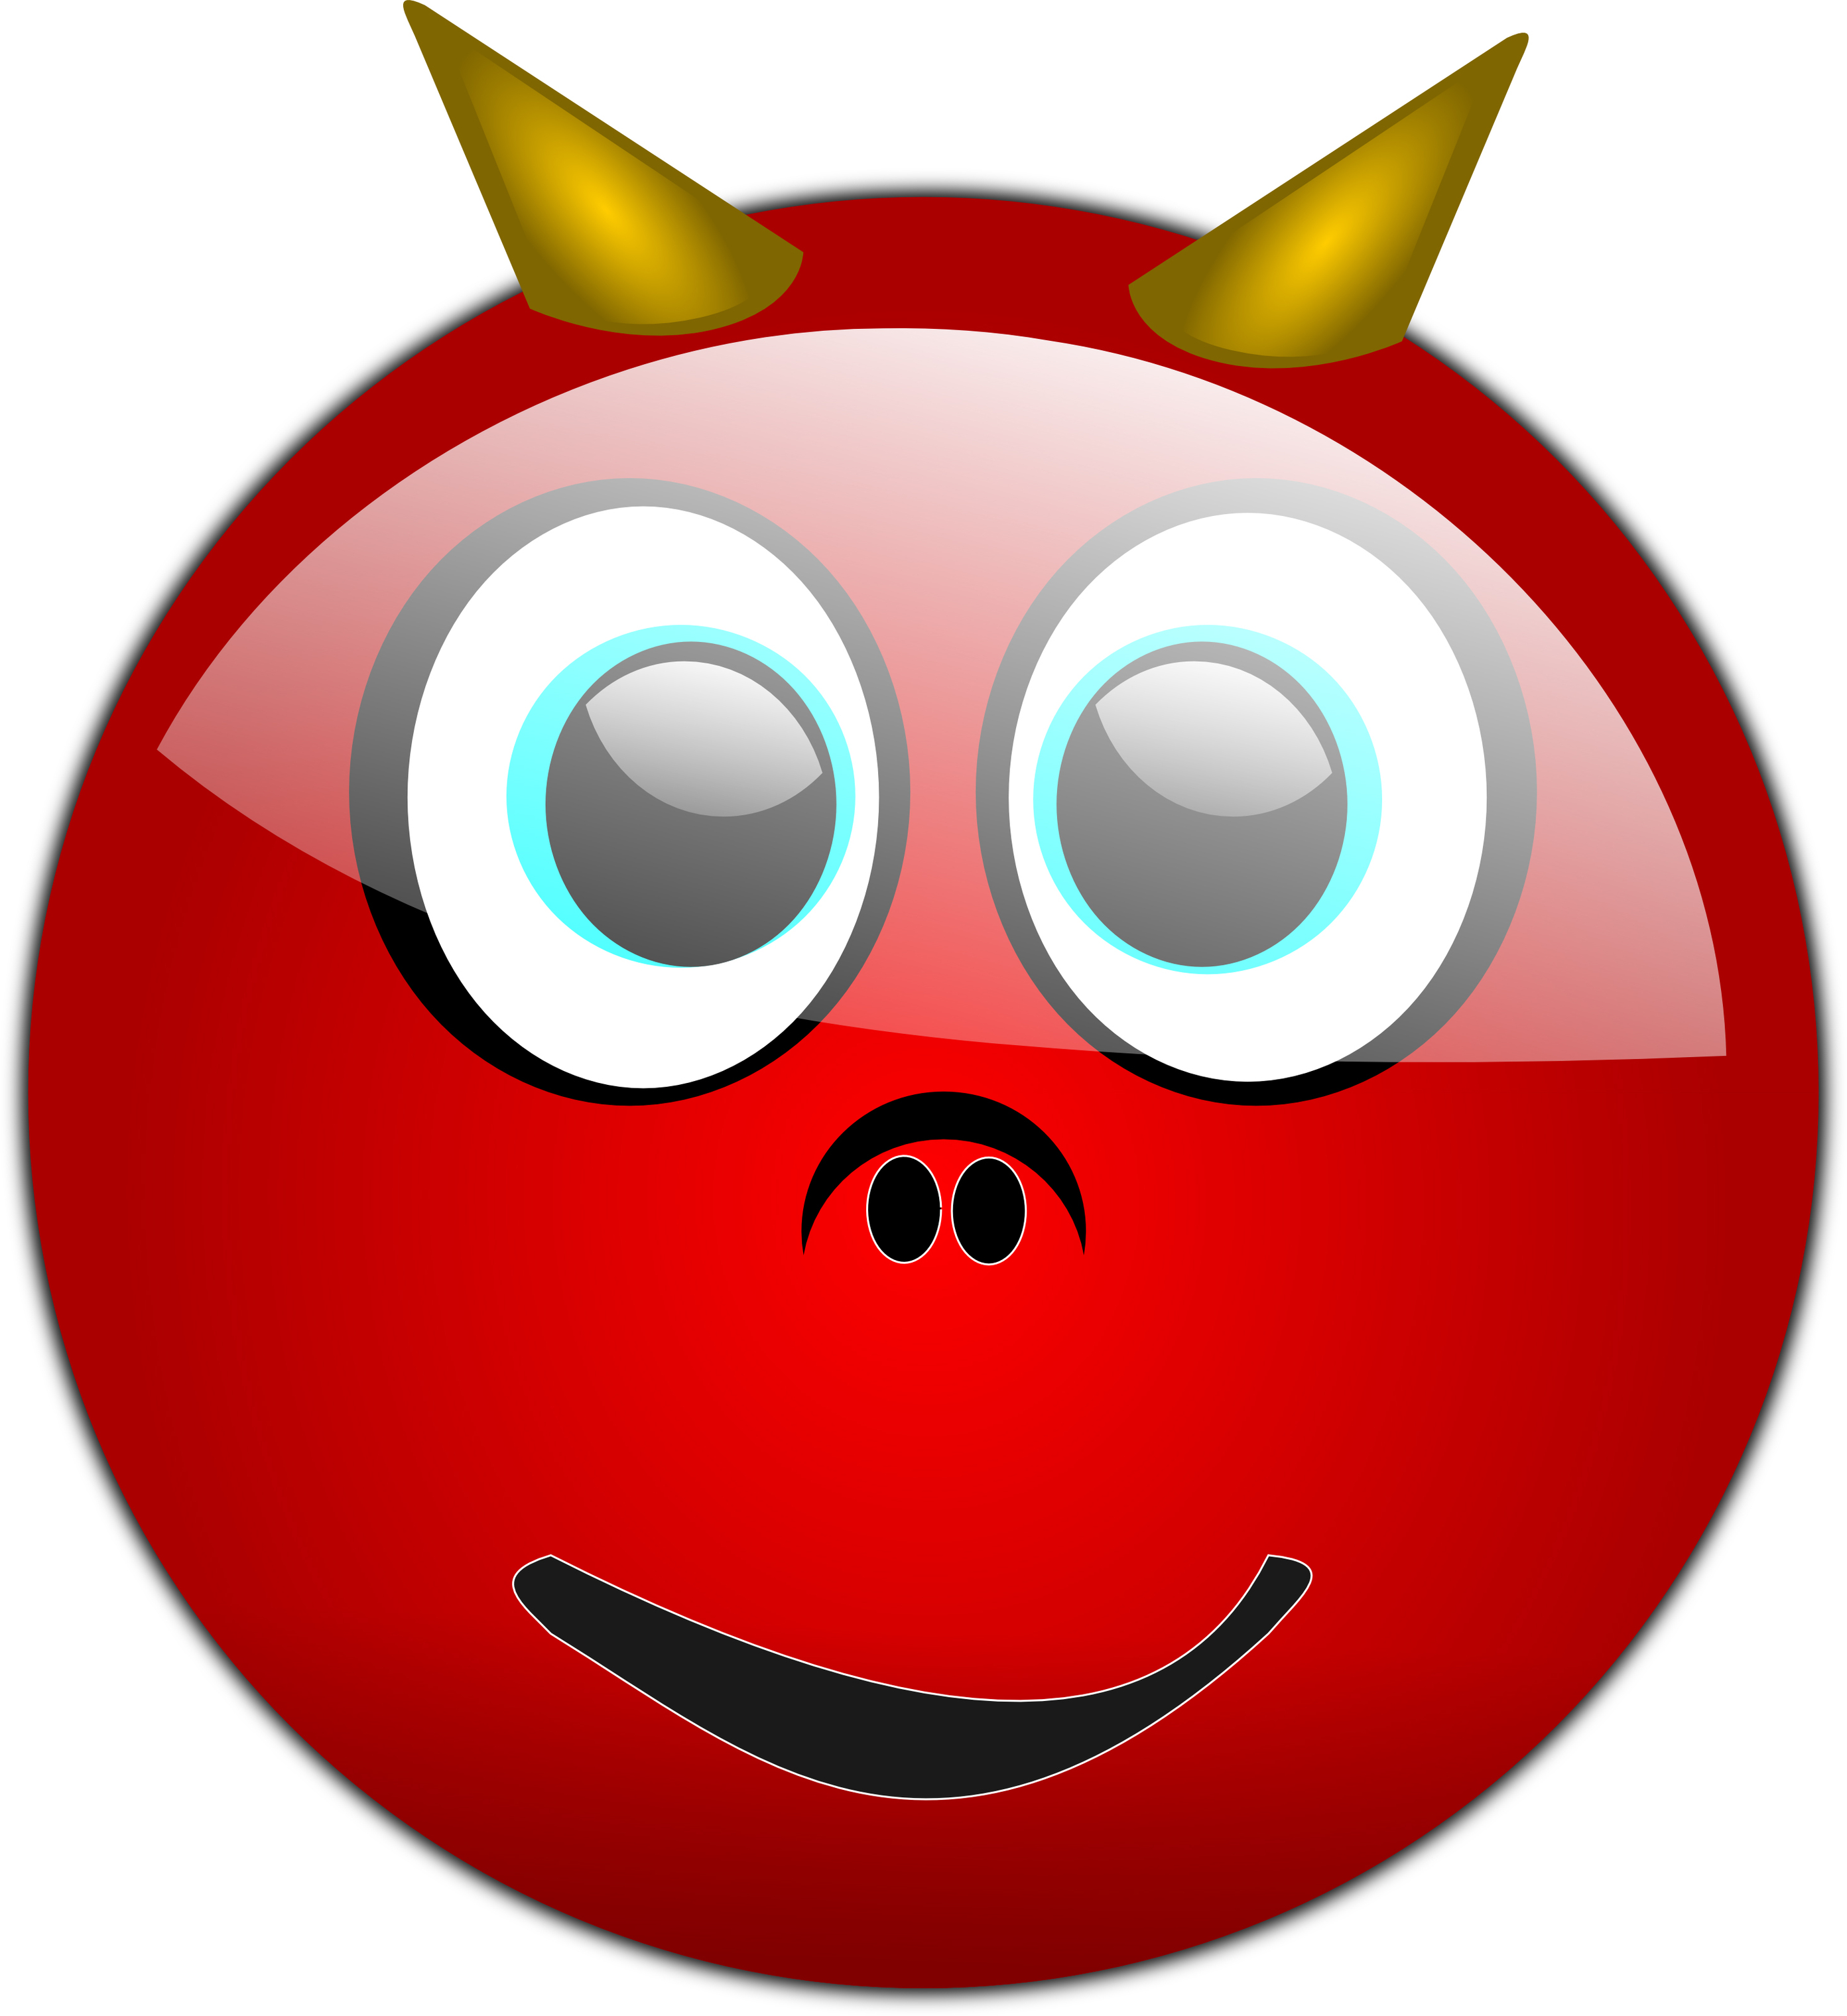 Smiley Face Devil Horns Clipart - Free to use Clip Art Resource